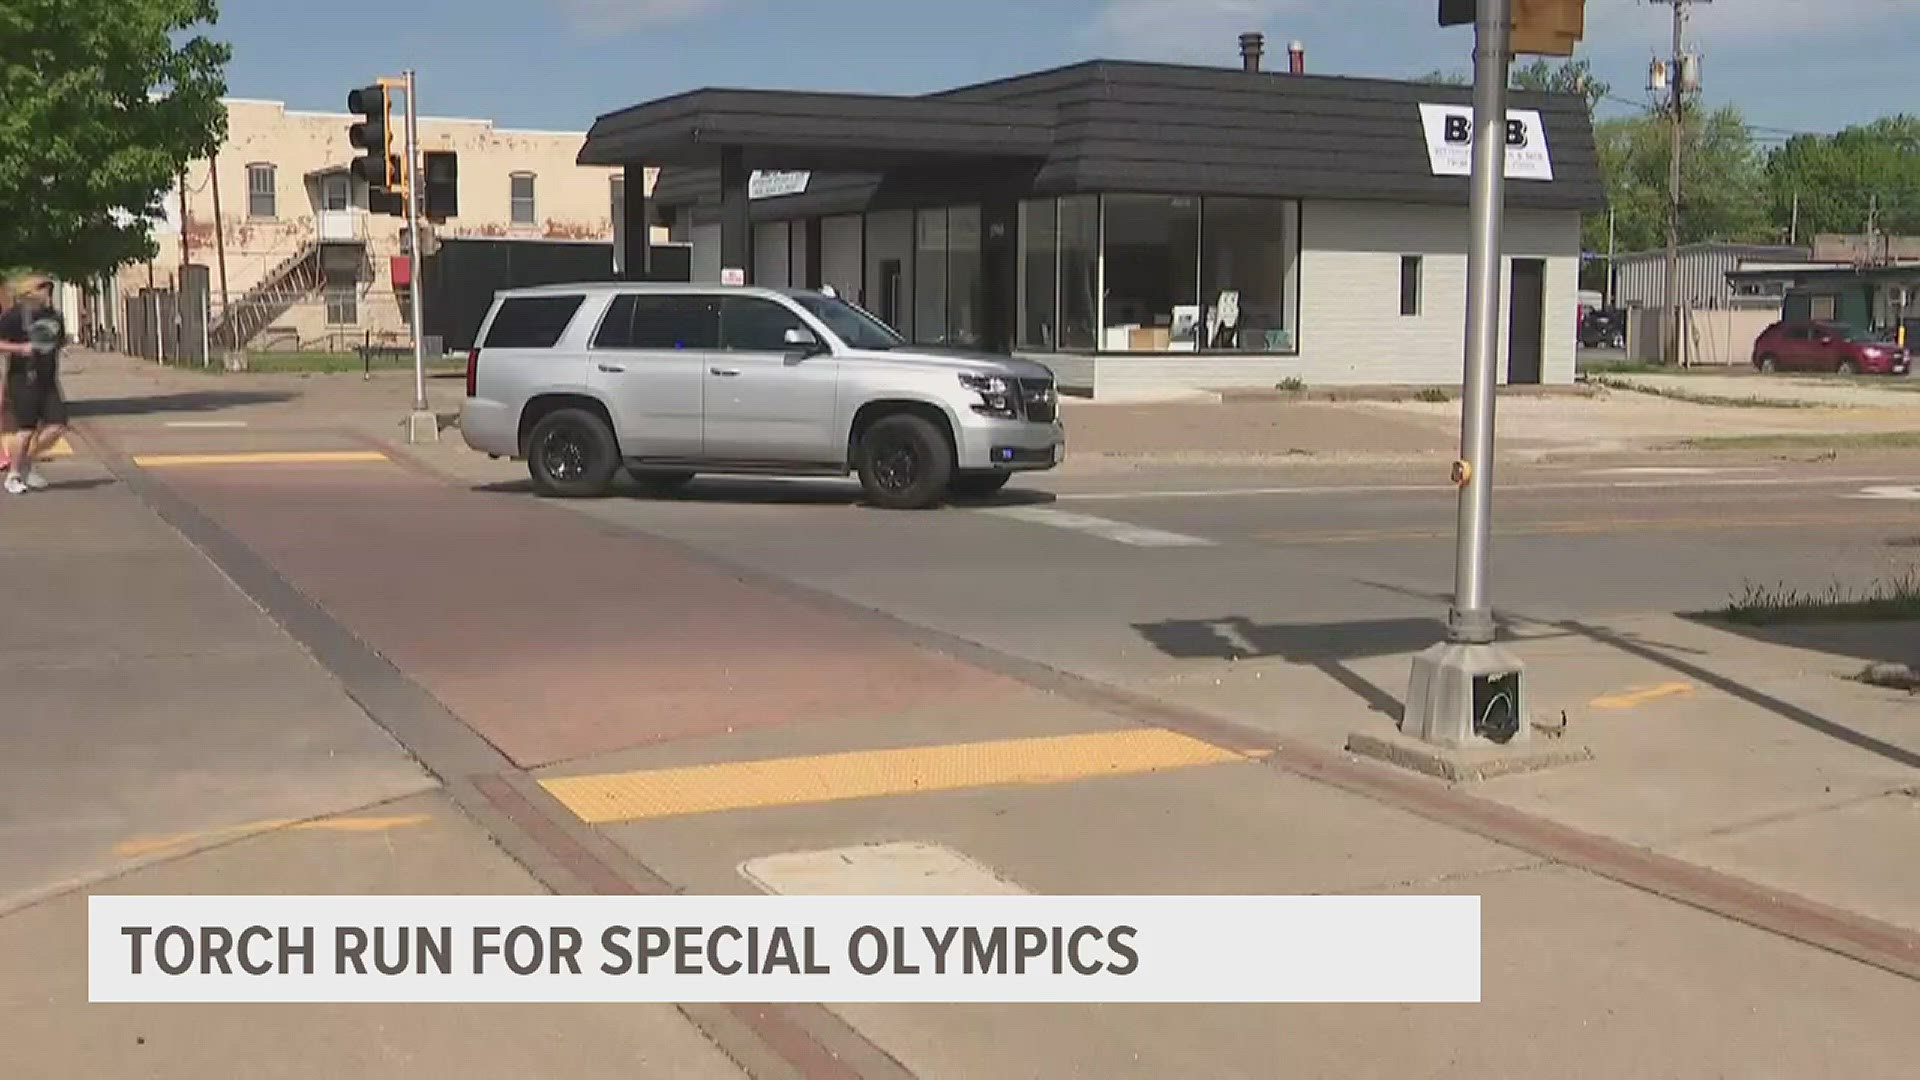 The torch's next stop will be in Ames before it's used to light the Olympic Flame at the opening ceremonies next week.